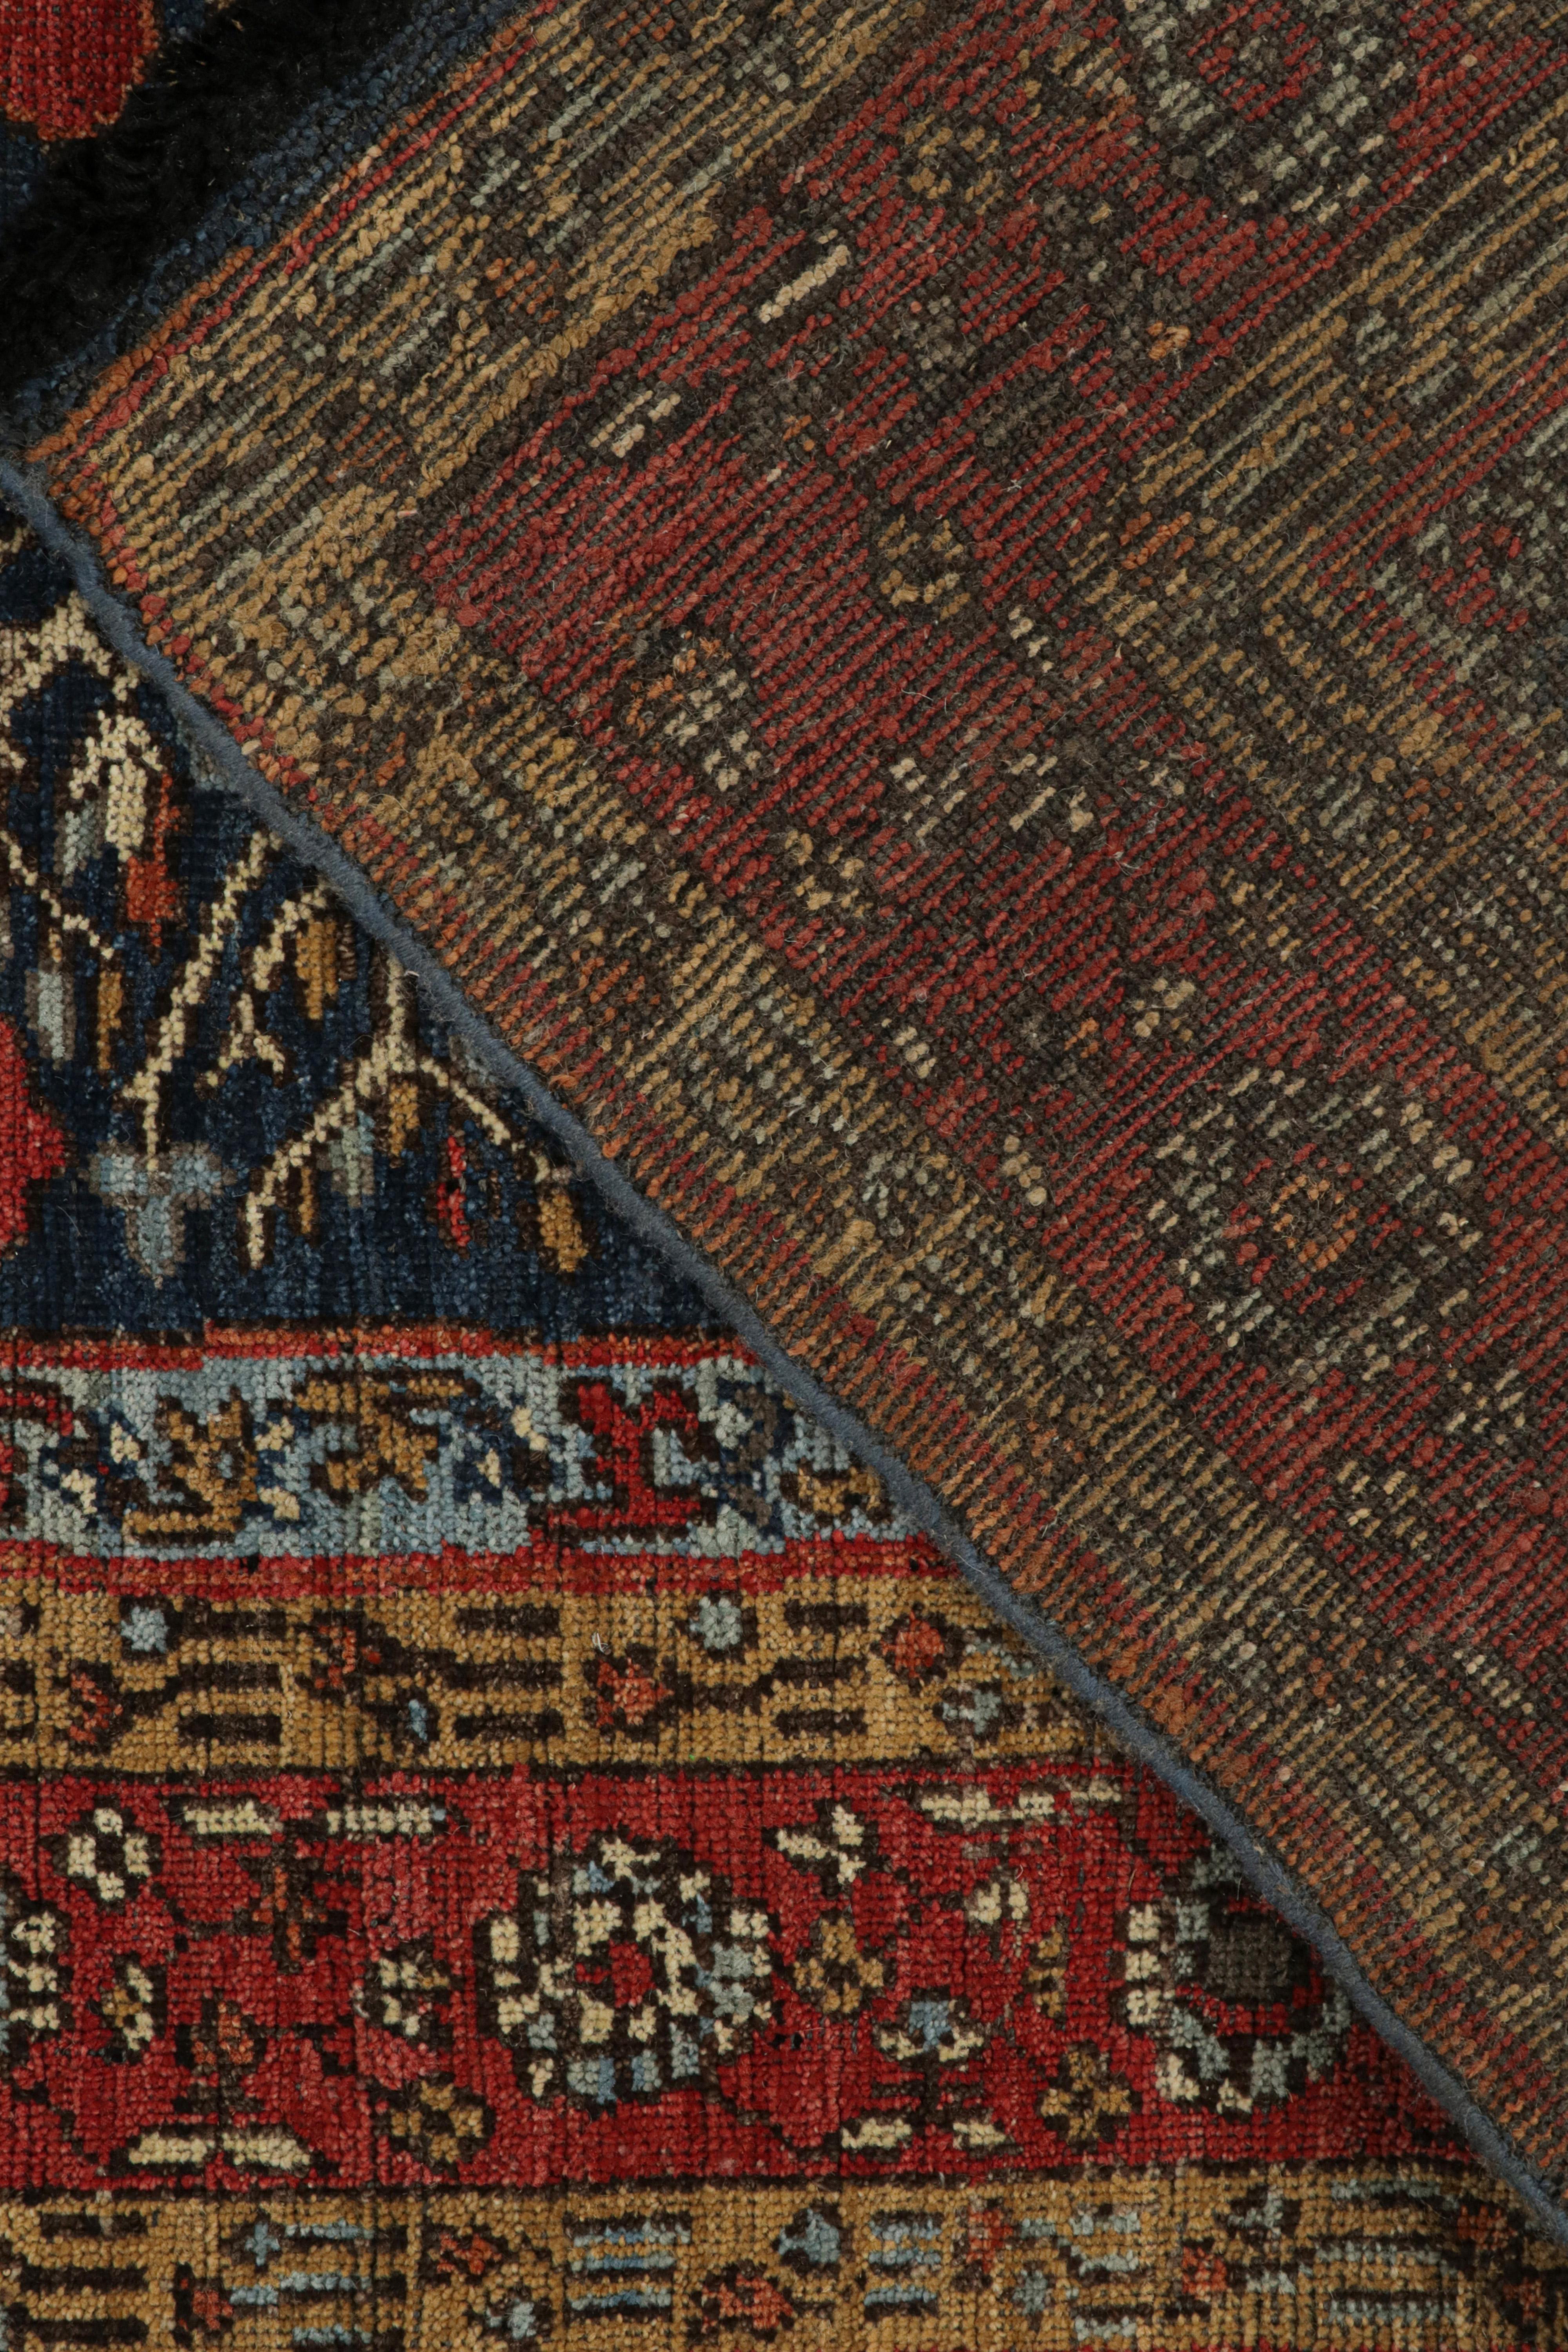 Contemporary Rug & Kilim’s Antique Persian Style Rug In Red, Blue & Gold Pictorials For Sale